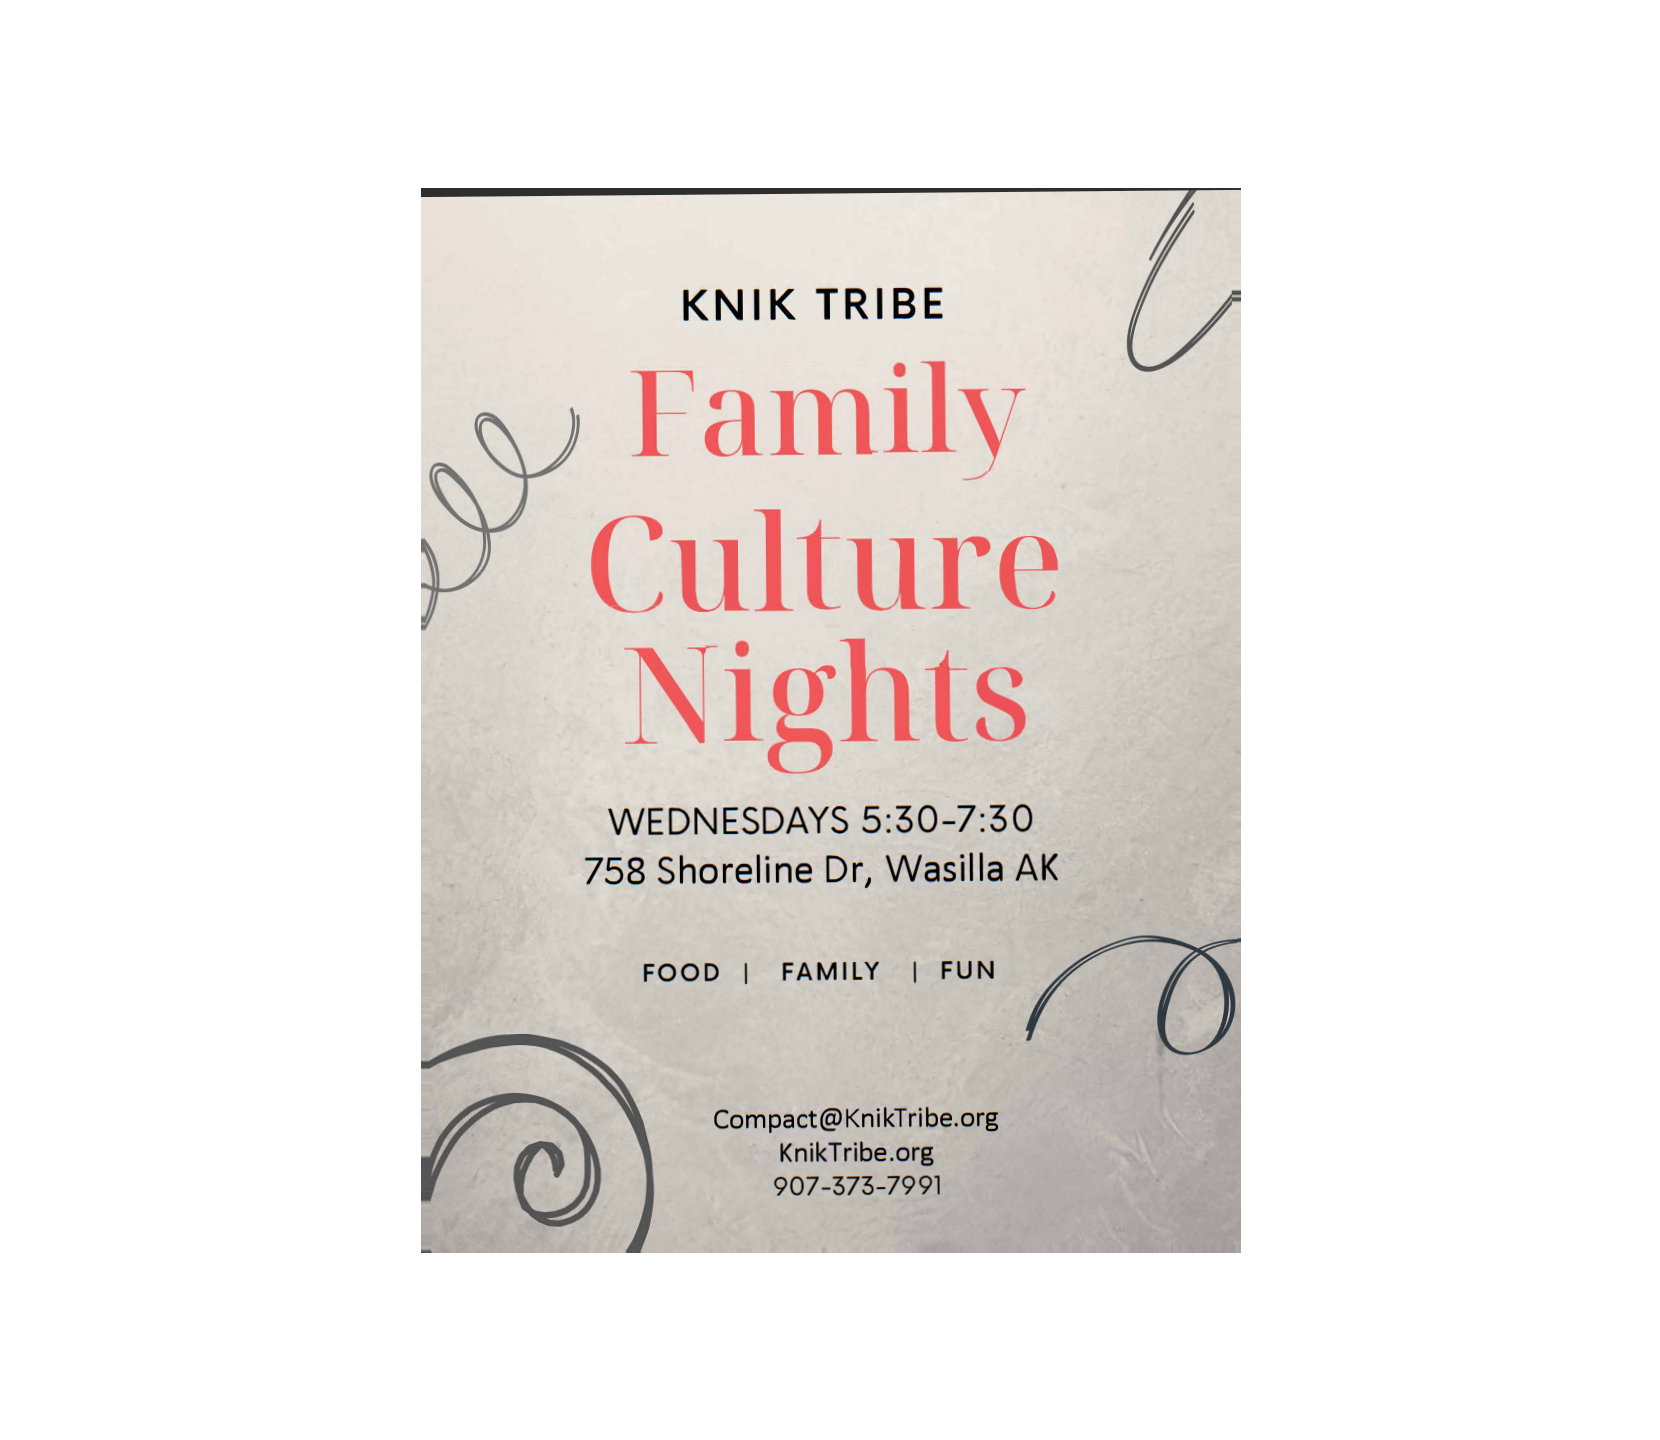 Flyer for weekly family culture night hosted by Knik Tribe